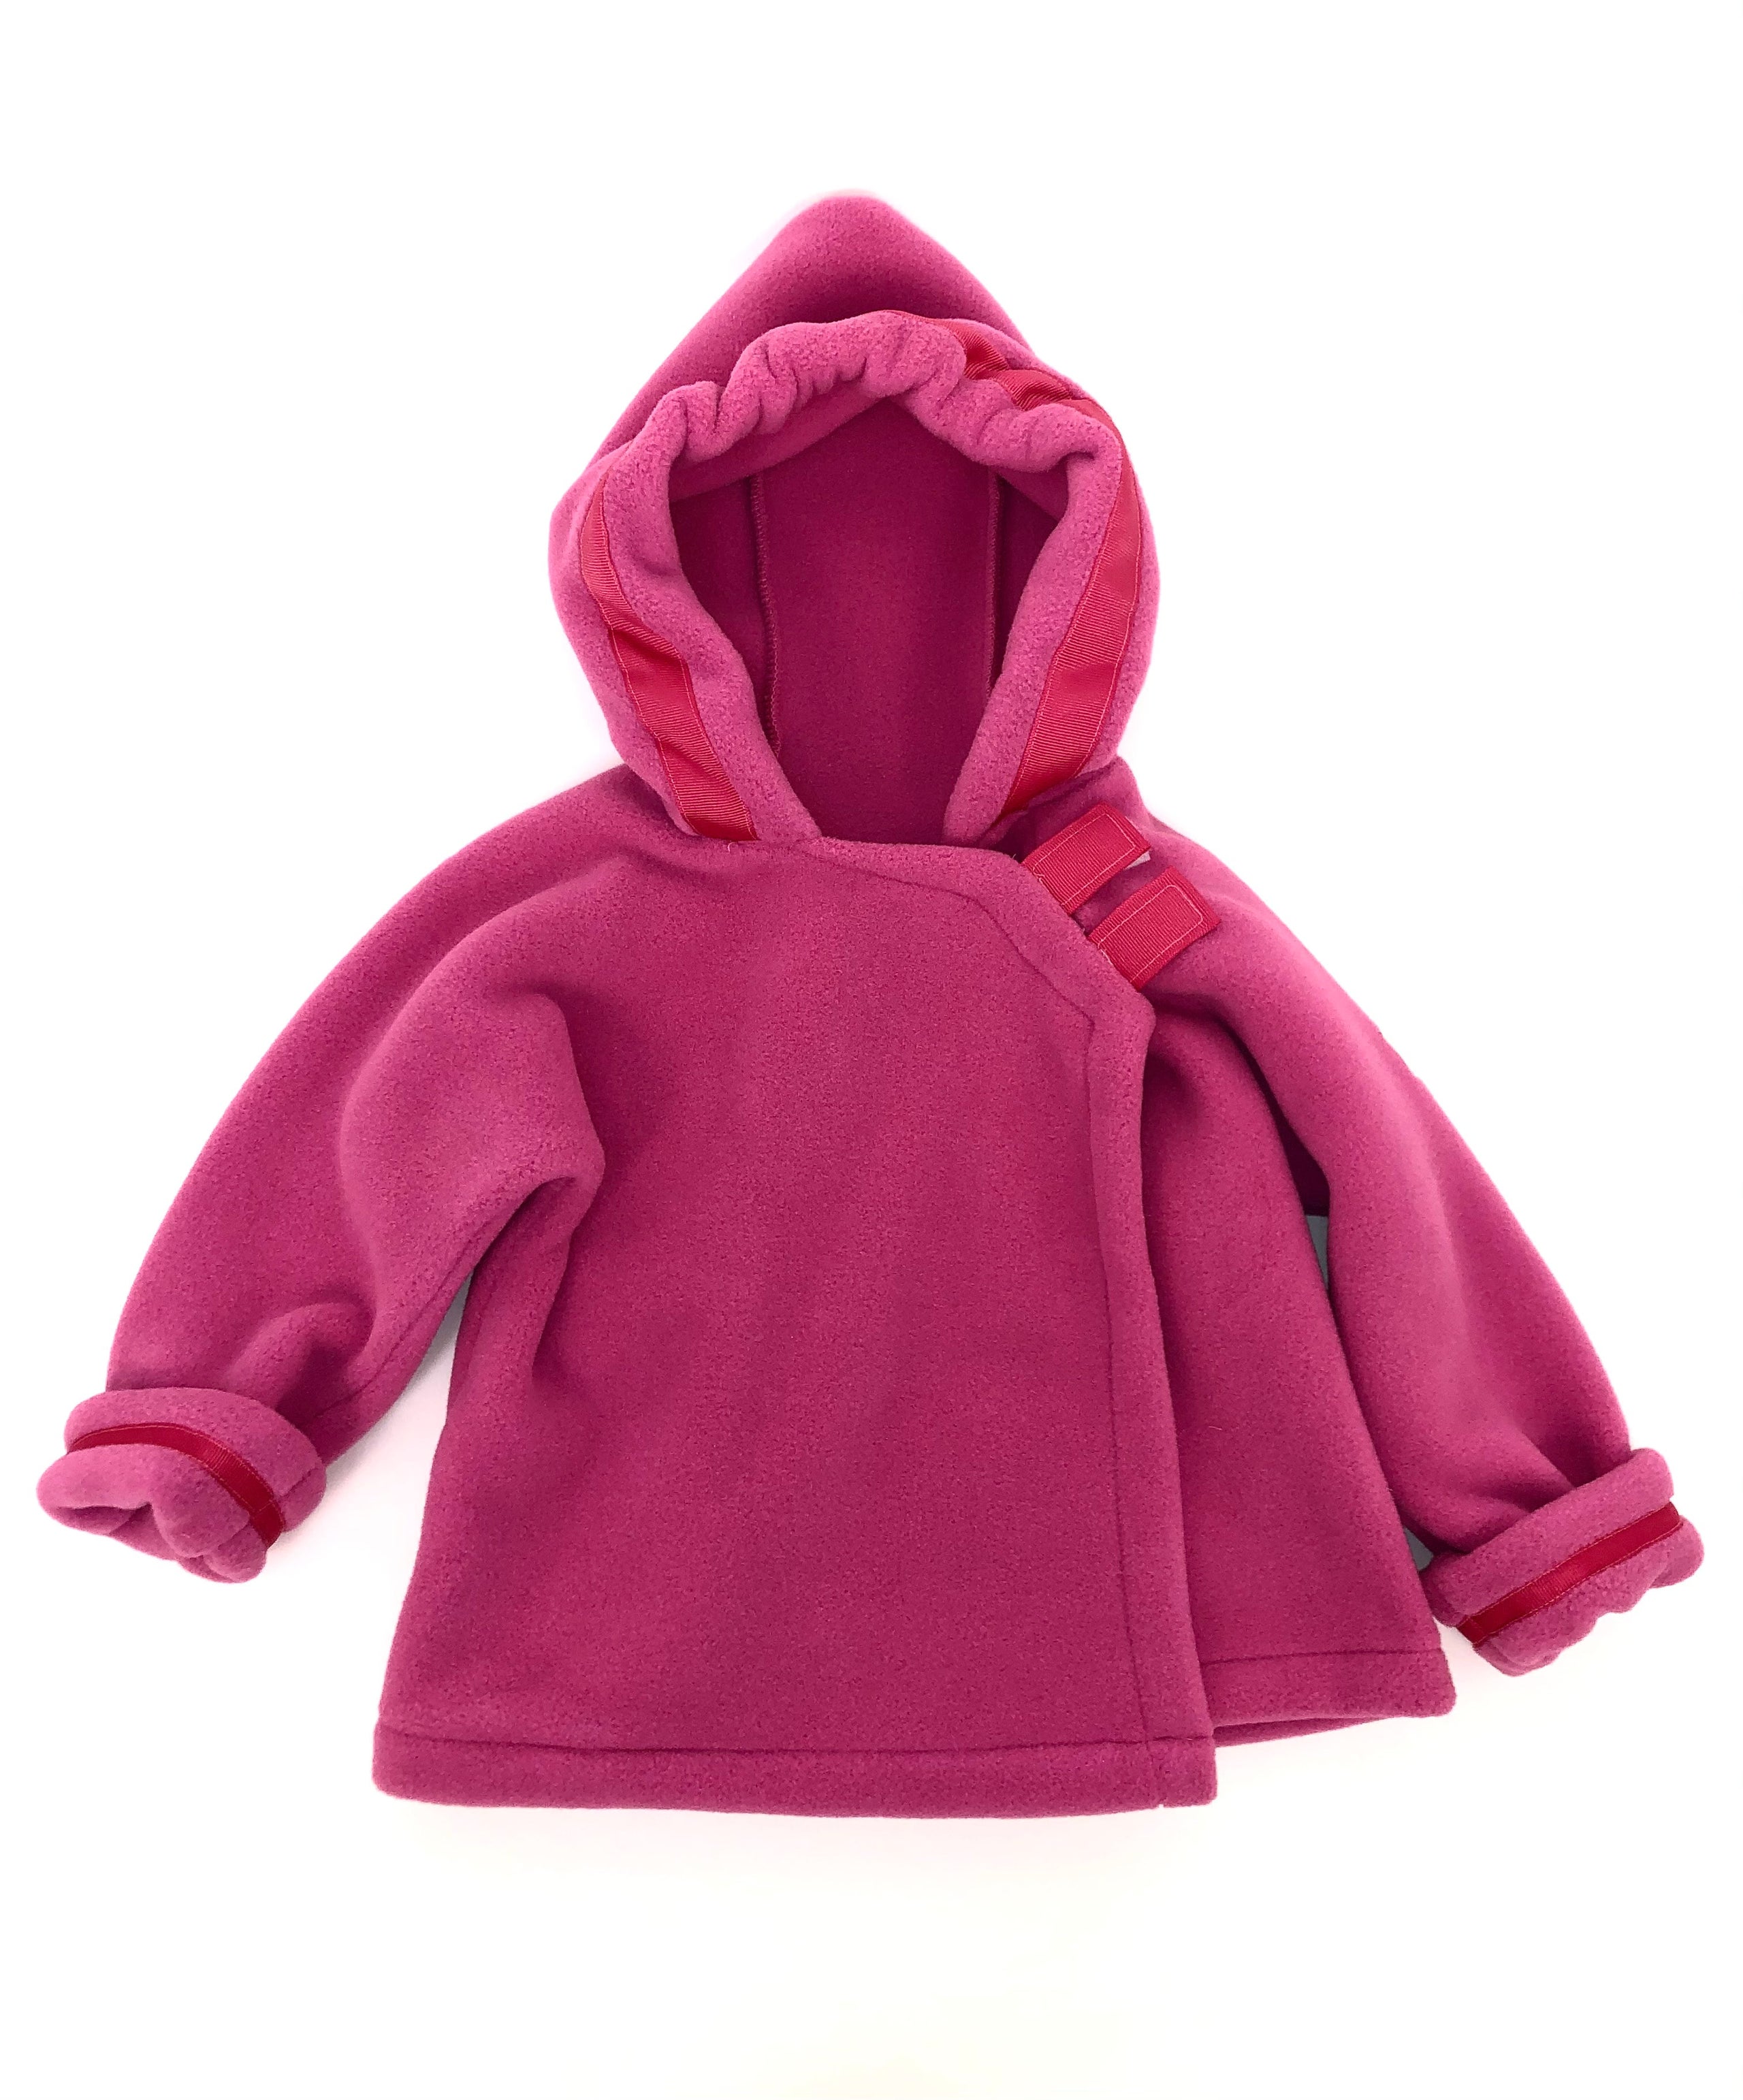 620 Fuzzy Pink Hoodie